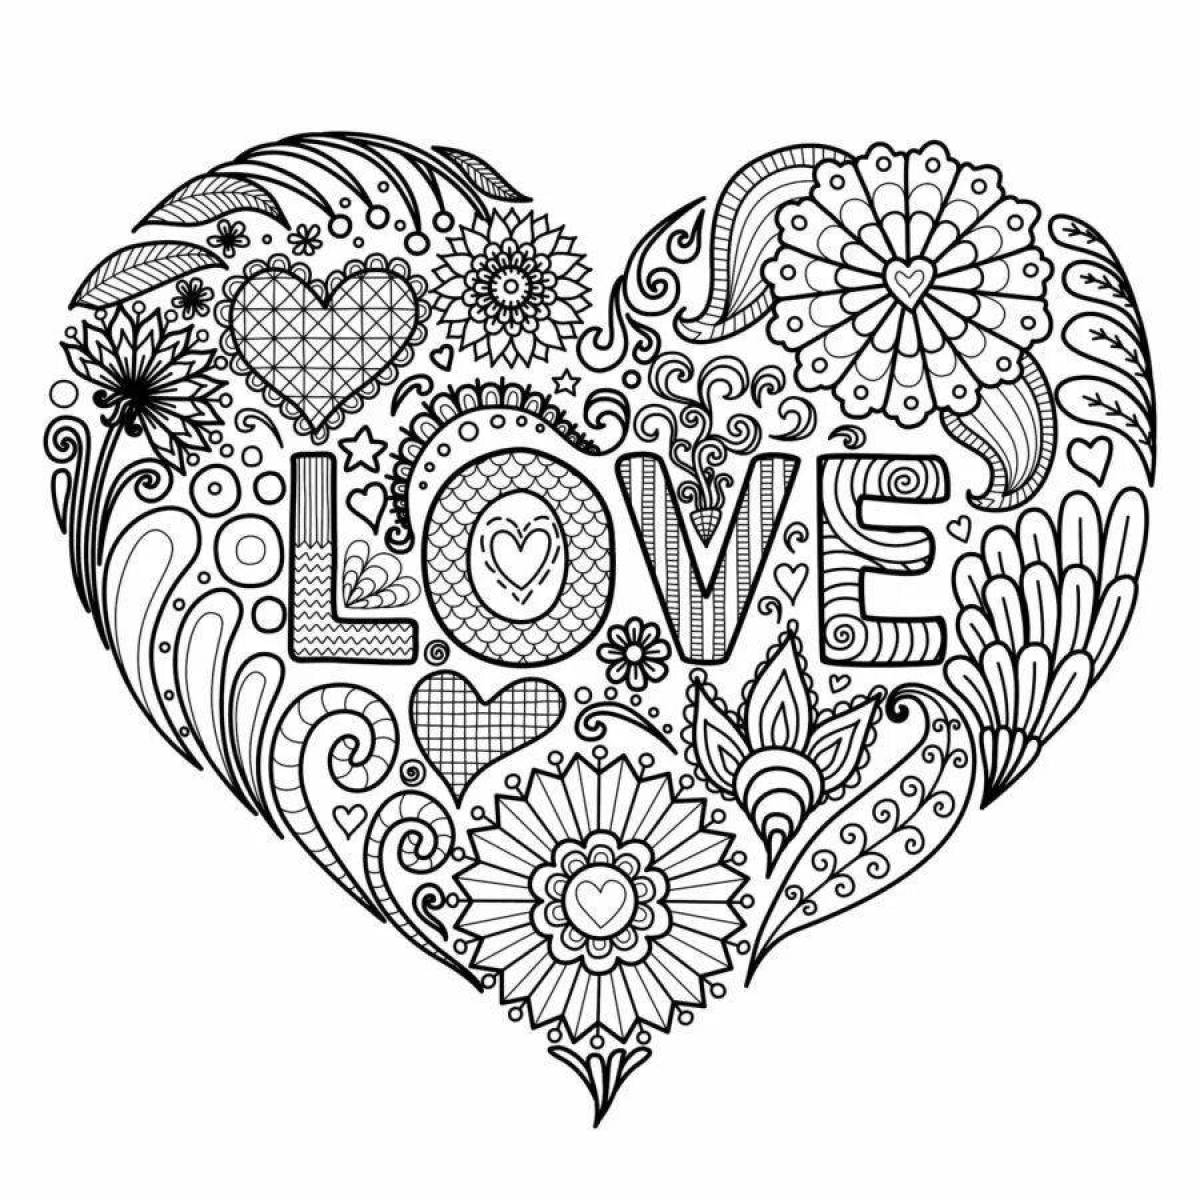 Charming heart coloring page